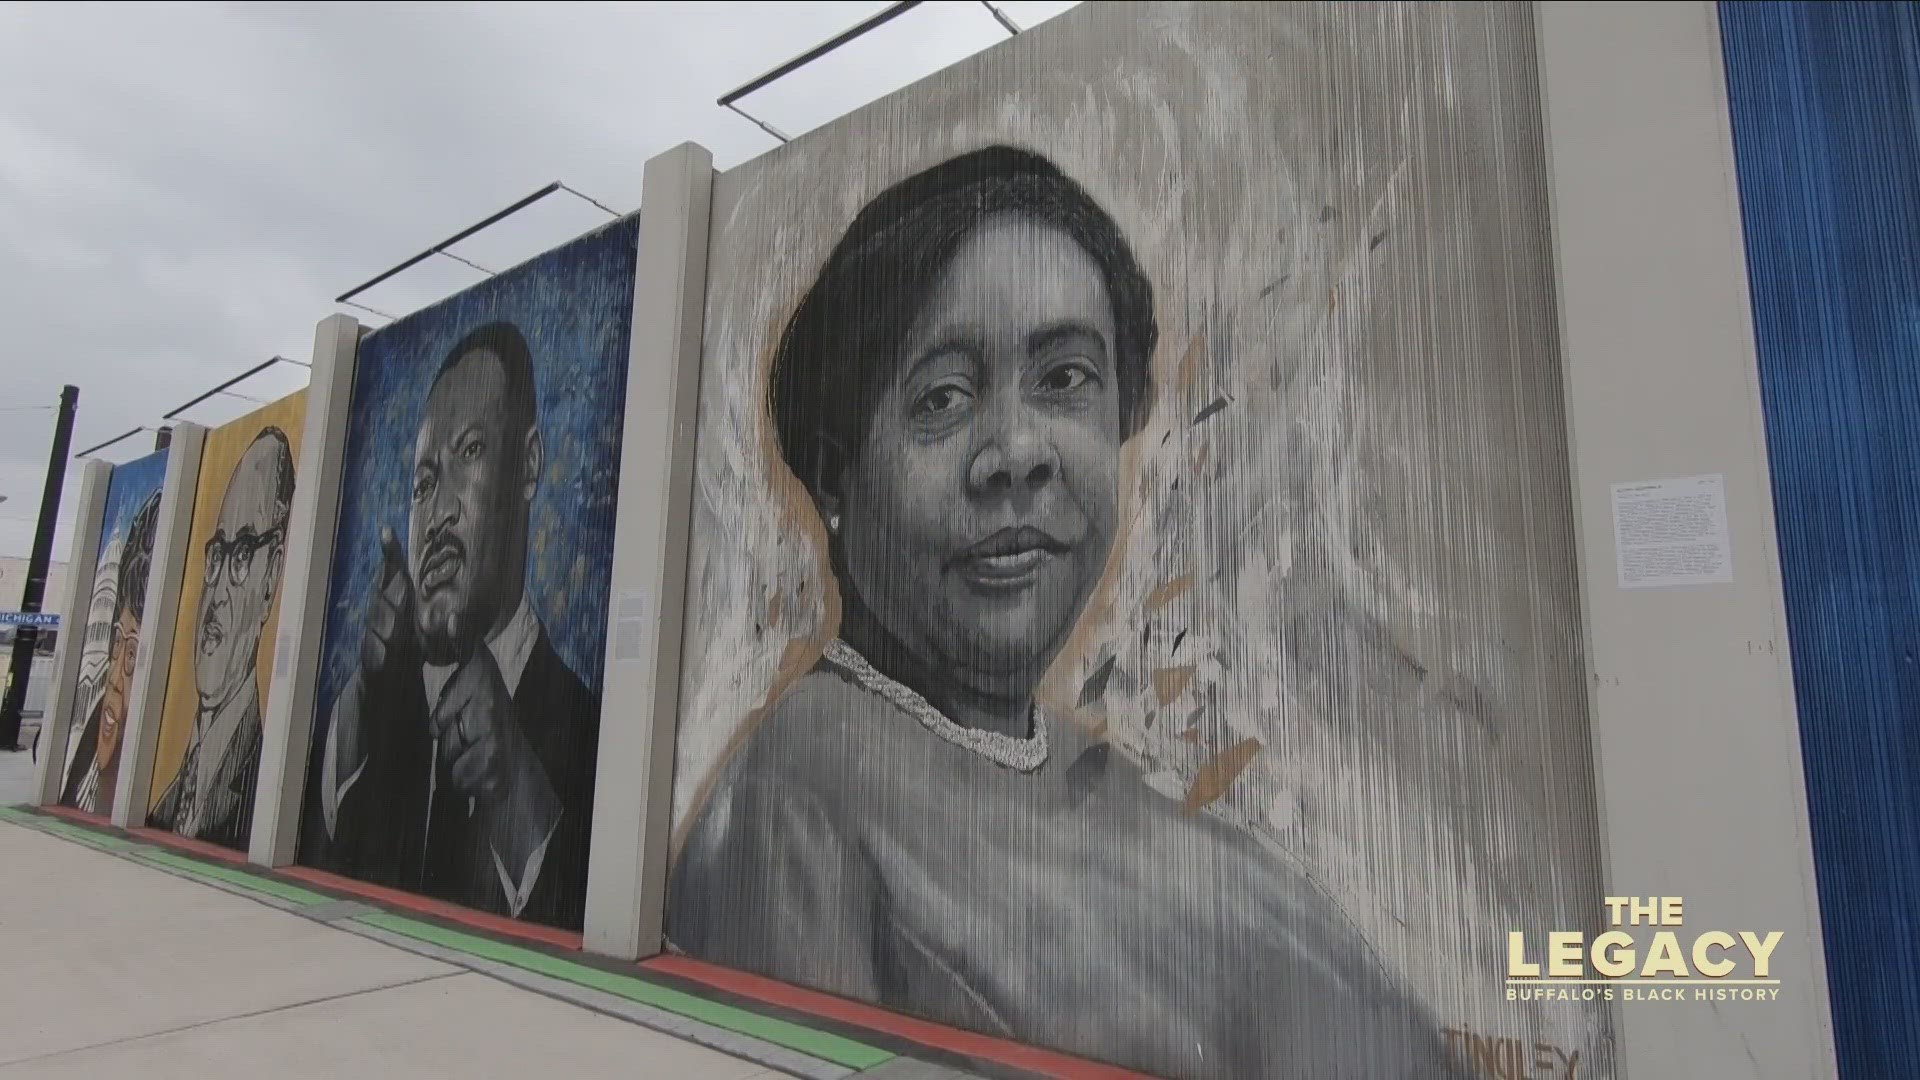 The Freedom Wall celebrates Black history, not just national figures, but pioneers in Buffalo.